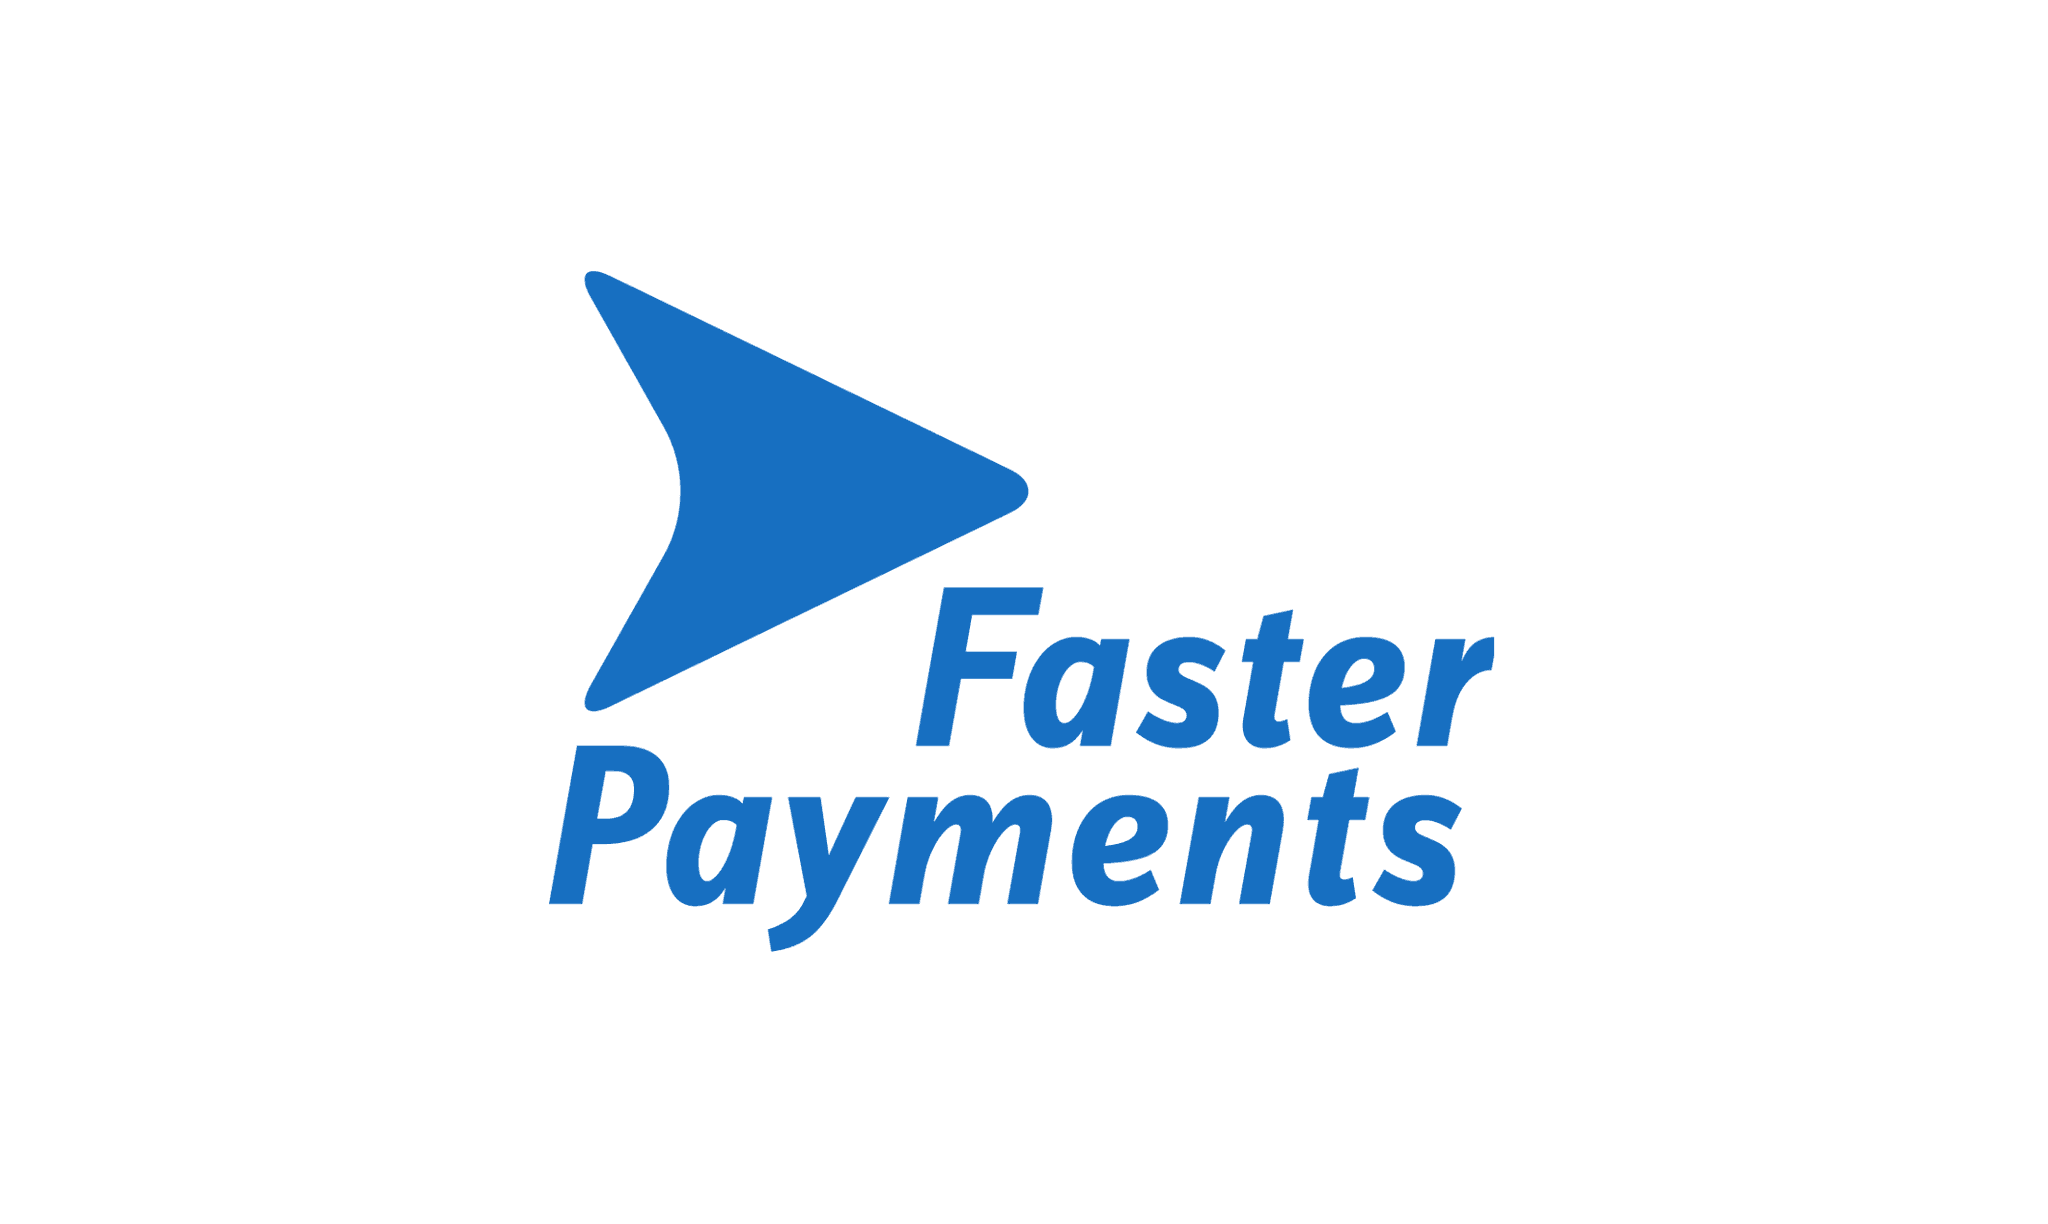 The Pay.UK Faster Payments logo